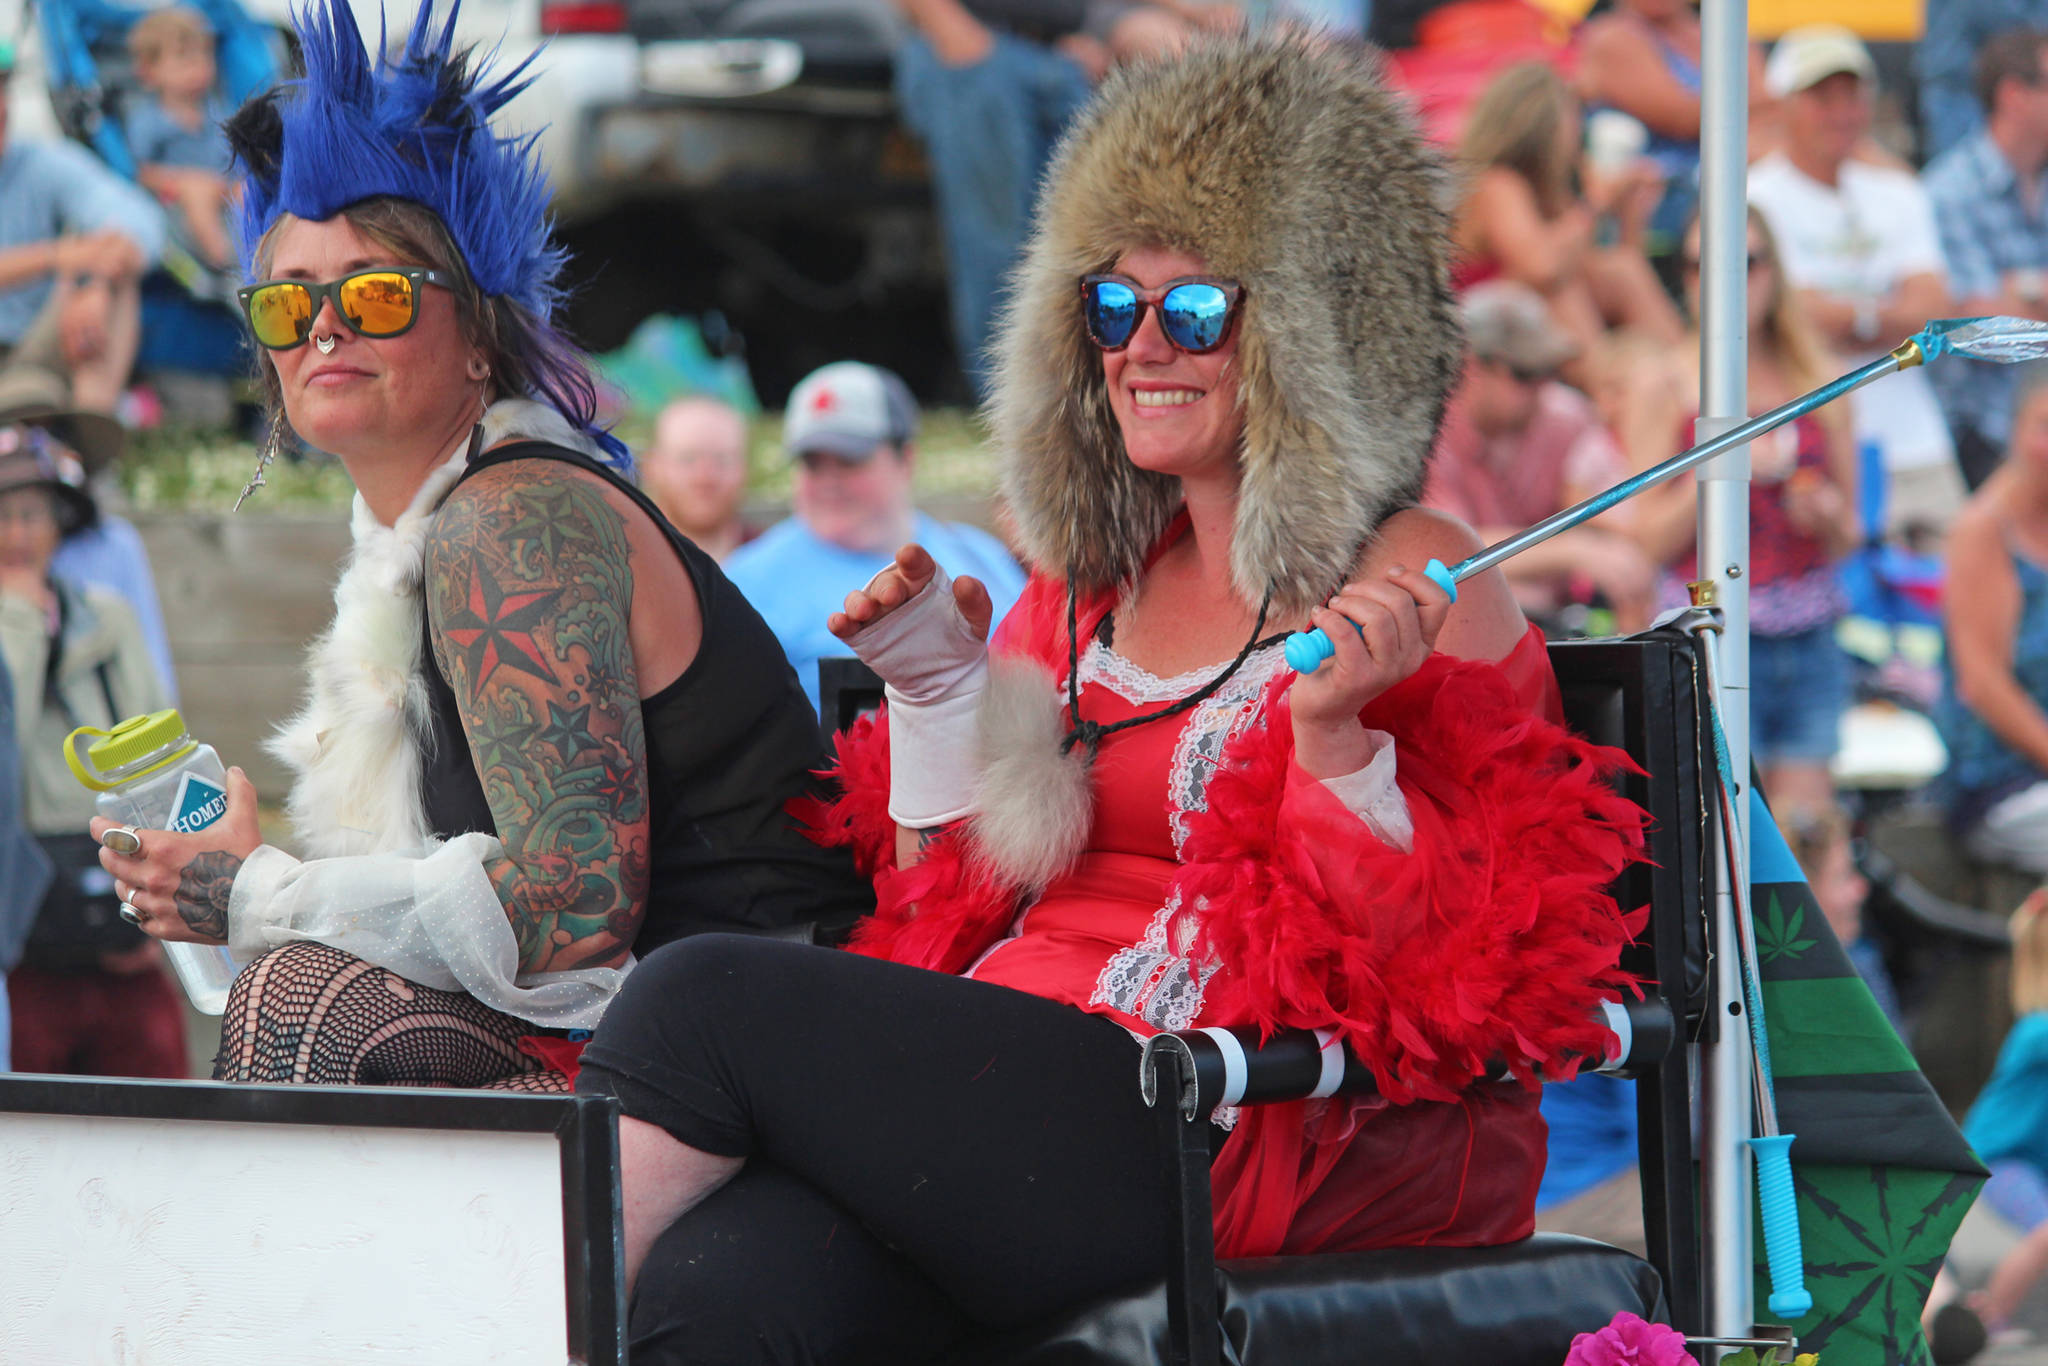 Participants in this year’s July Fourth parade hosted by the Homer Chamber of Commerce ride in a float on Thursday, July 4, 2019 down Pioneer Avenue in Homer, Alaska. (Photo by Megan Pacer/Homer News)